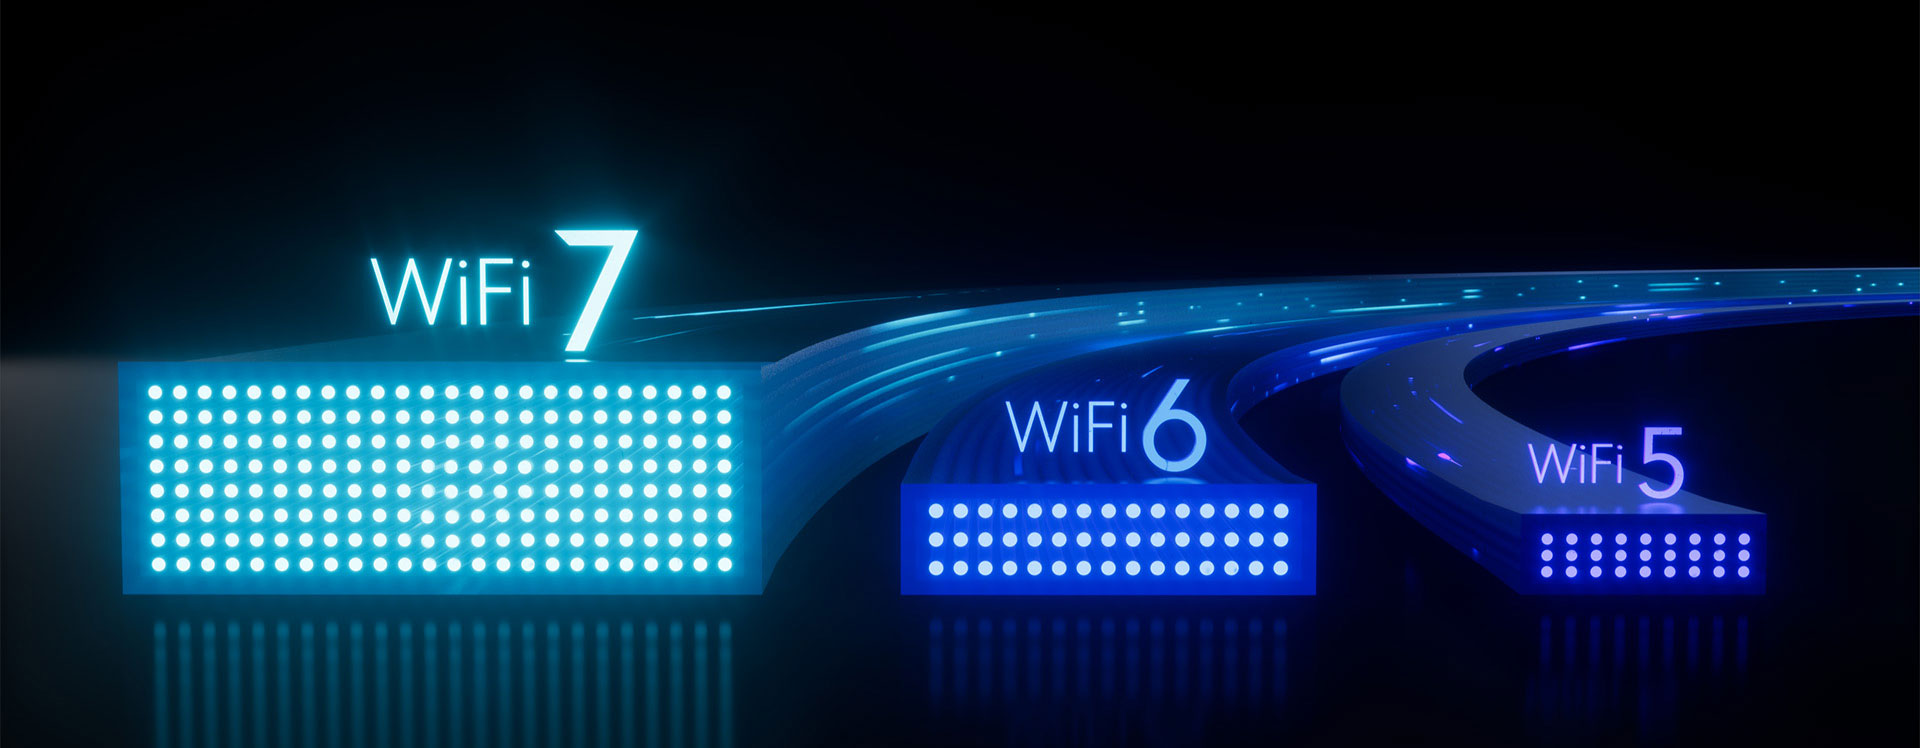 How fast is WiFi 7?